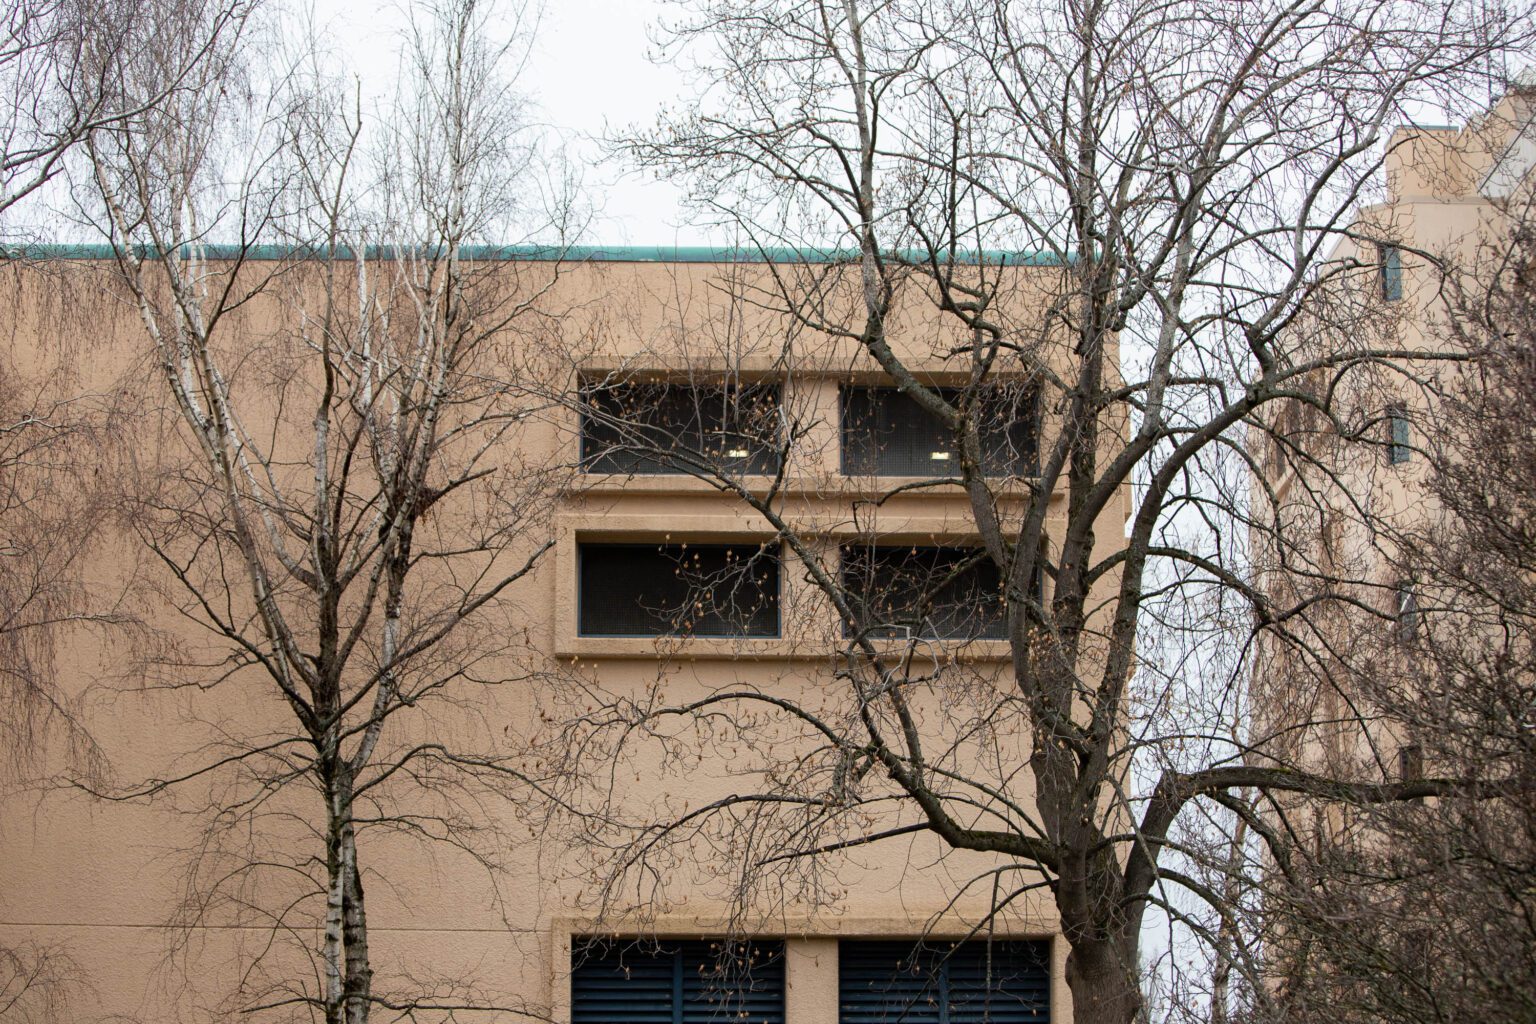 Whatcom County's jail windows behind tree branches.